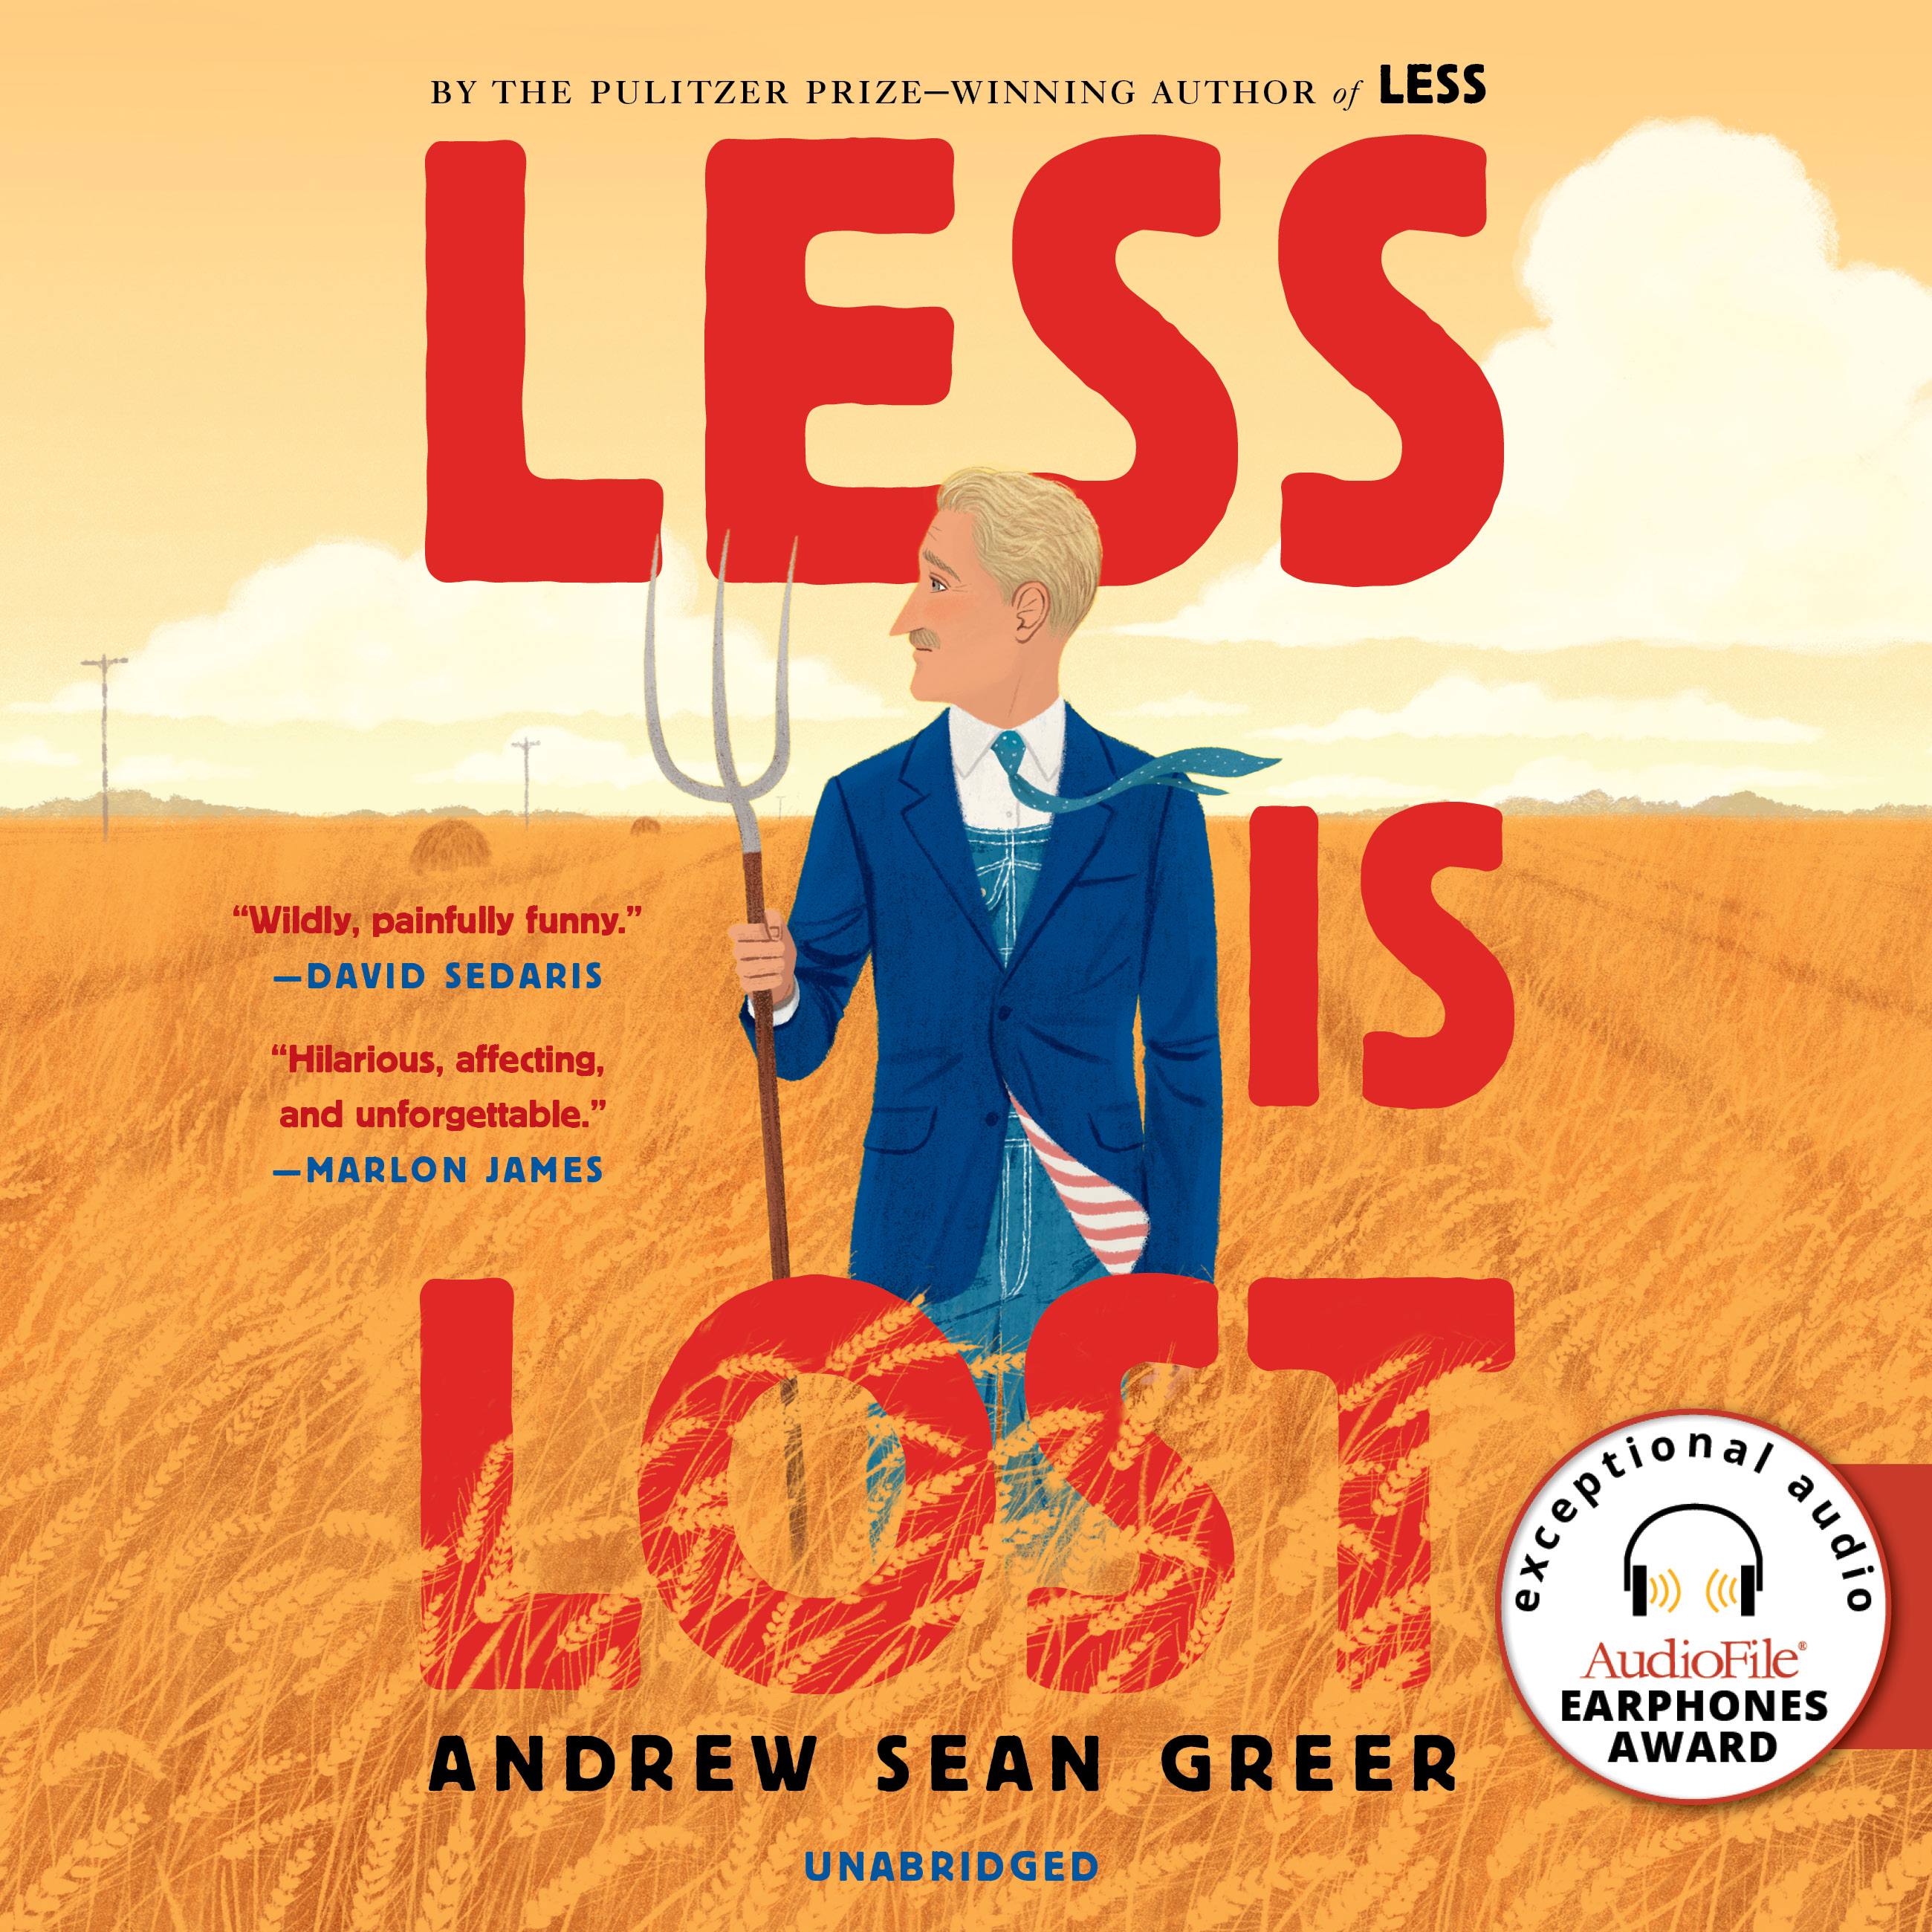 Lost　Book　Less　Is　Hachette　Sean　by　Greer　Andrew　Group